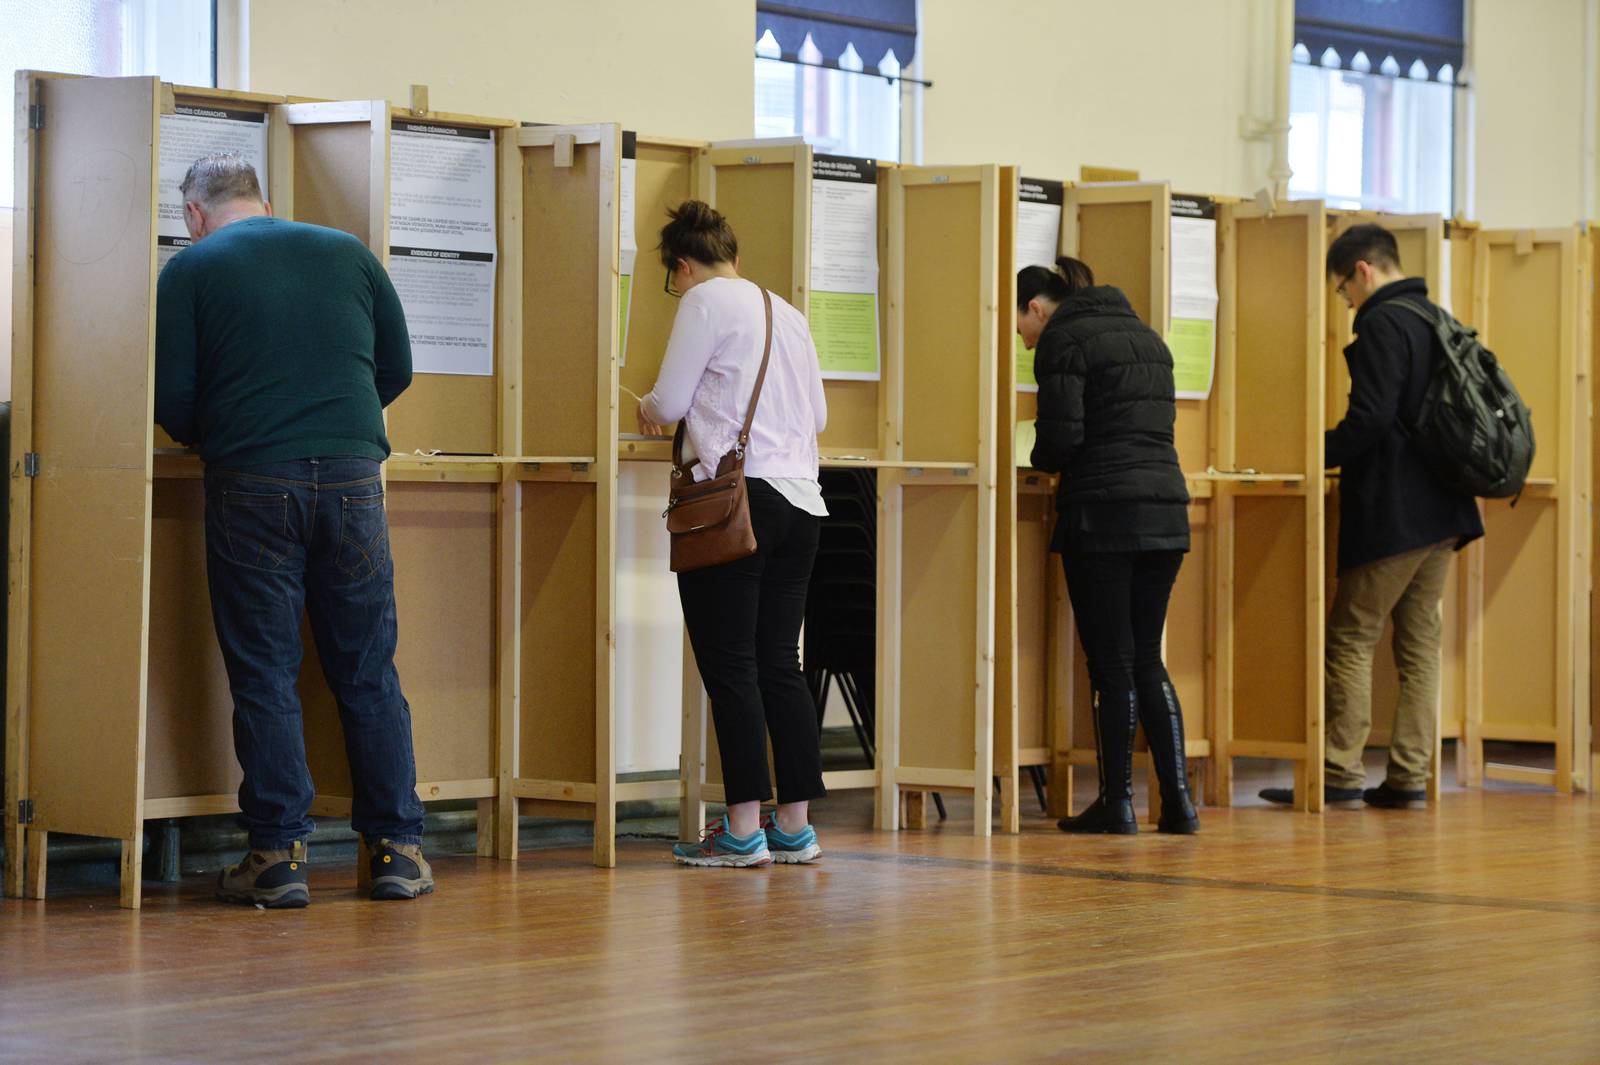 22/05/2015 - NEWS  - Voters voting in the marriage referendum and the Age of Presidential Candidates referendum at St. Andrews Rescource Centre, Pearse street in Dublin.
Photograph: Alan Betson / The Irish Times